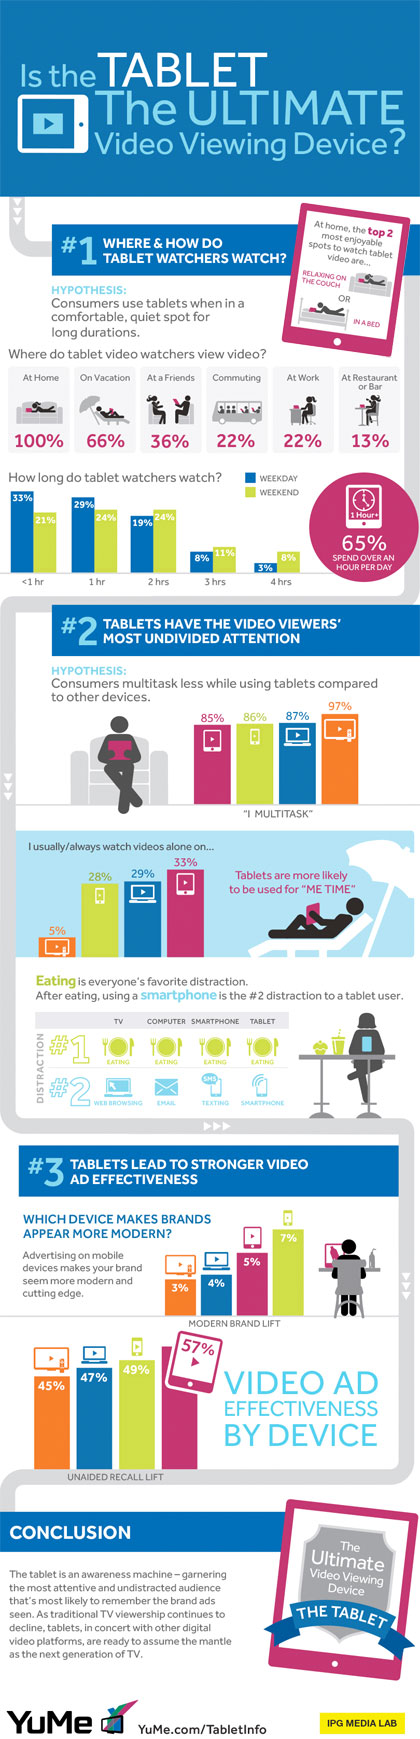 Tablets-Used-for-Video-Viewing-Infographic1